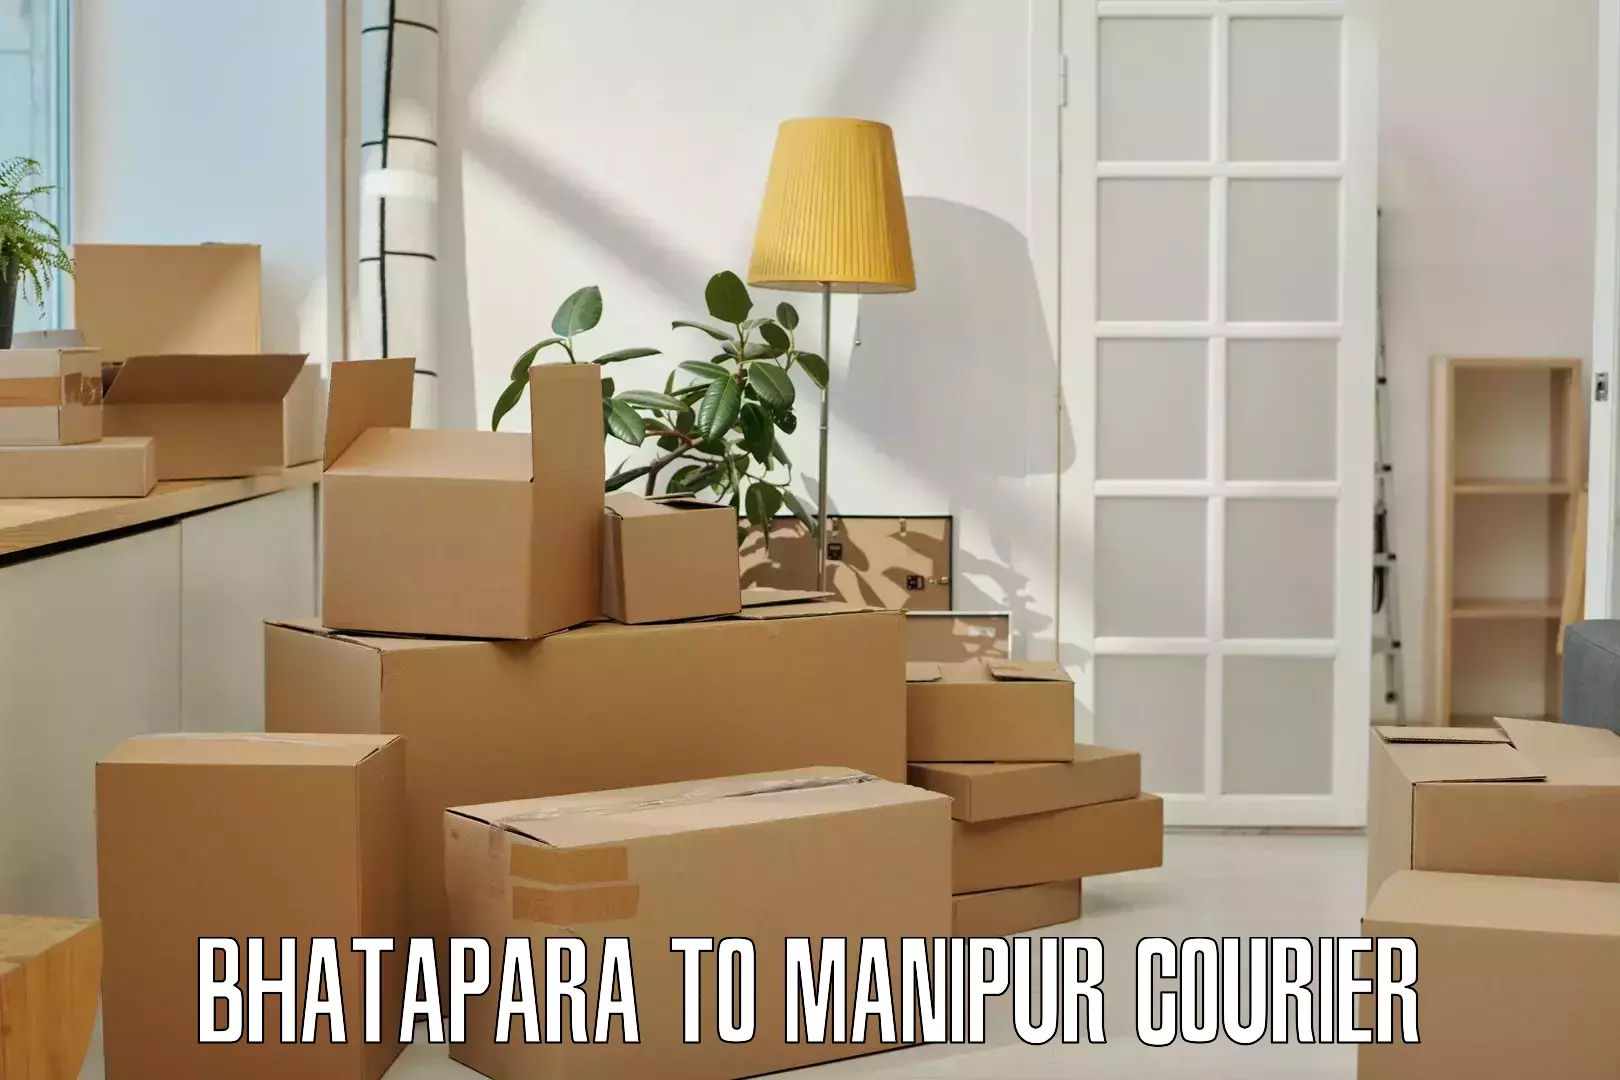 End-to-end delivery Bhatapara to Moirang